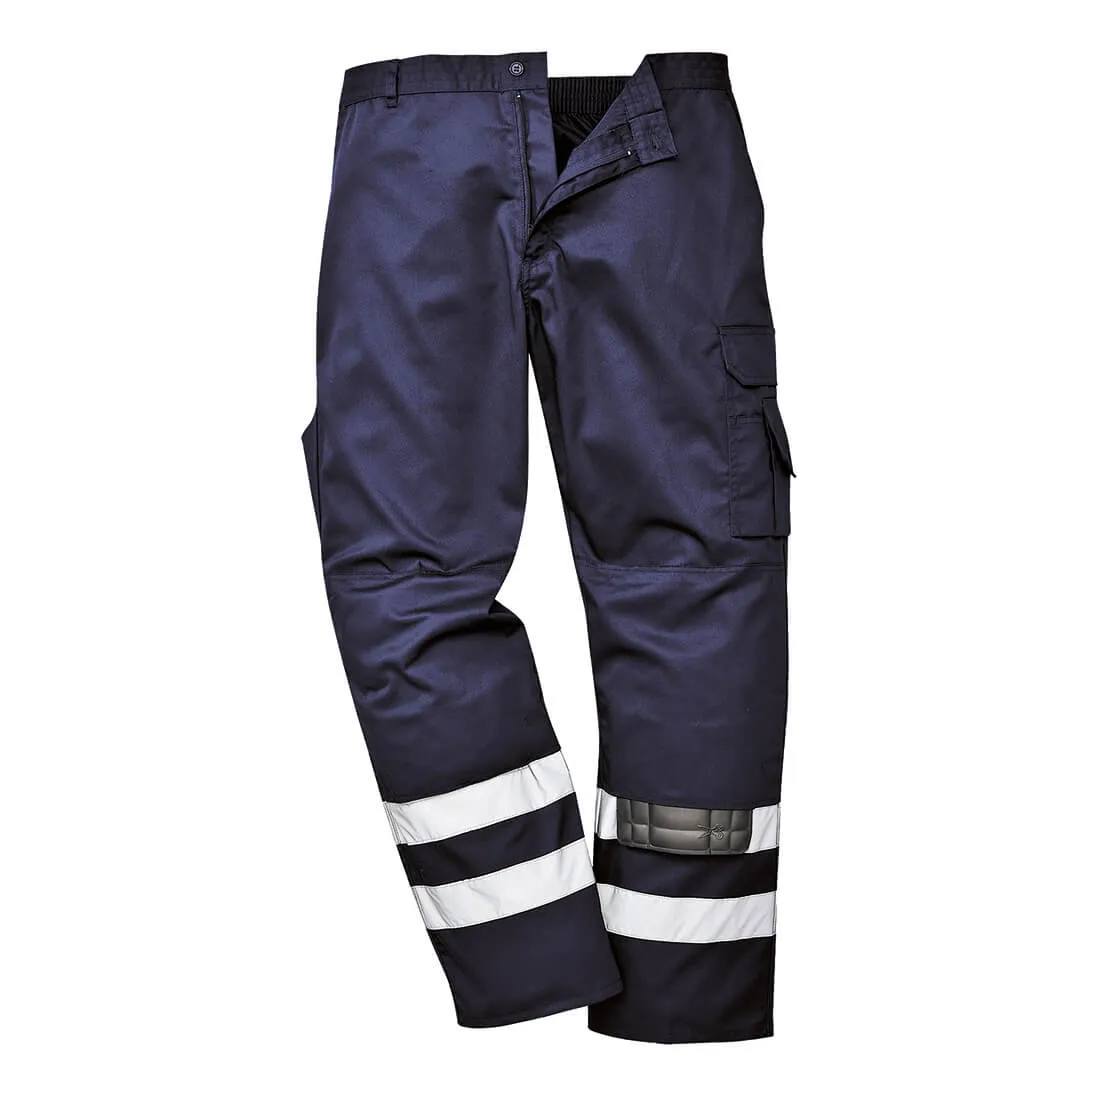 Portwest Iona S917 Safety Trousers - Navy Blue, Small, 31"